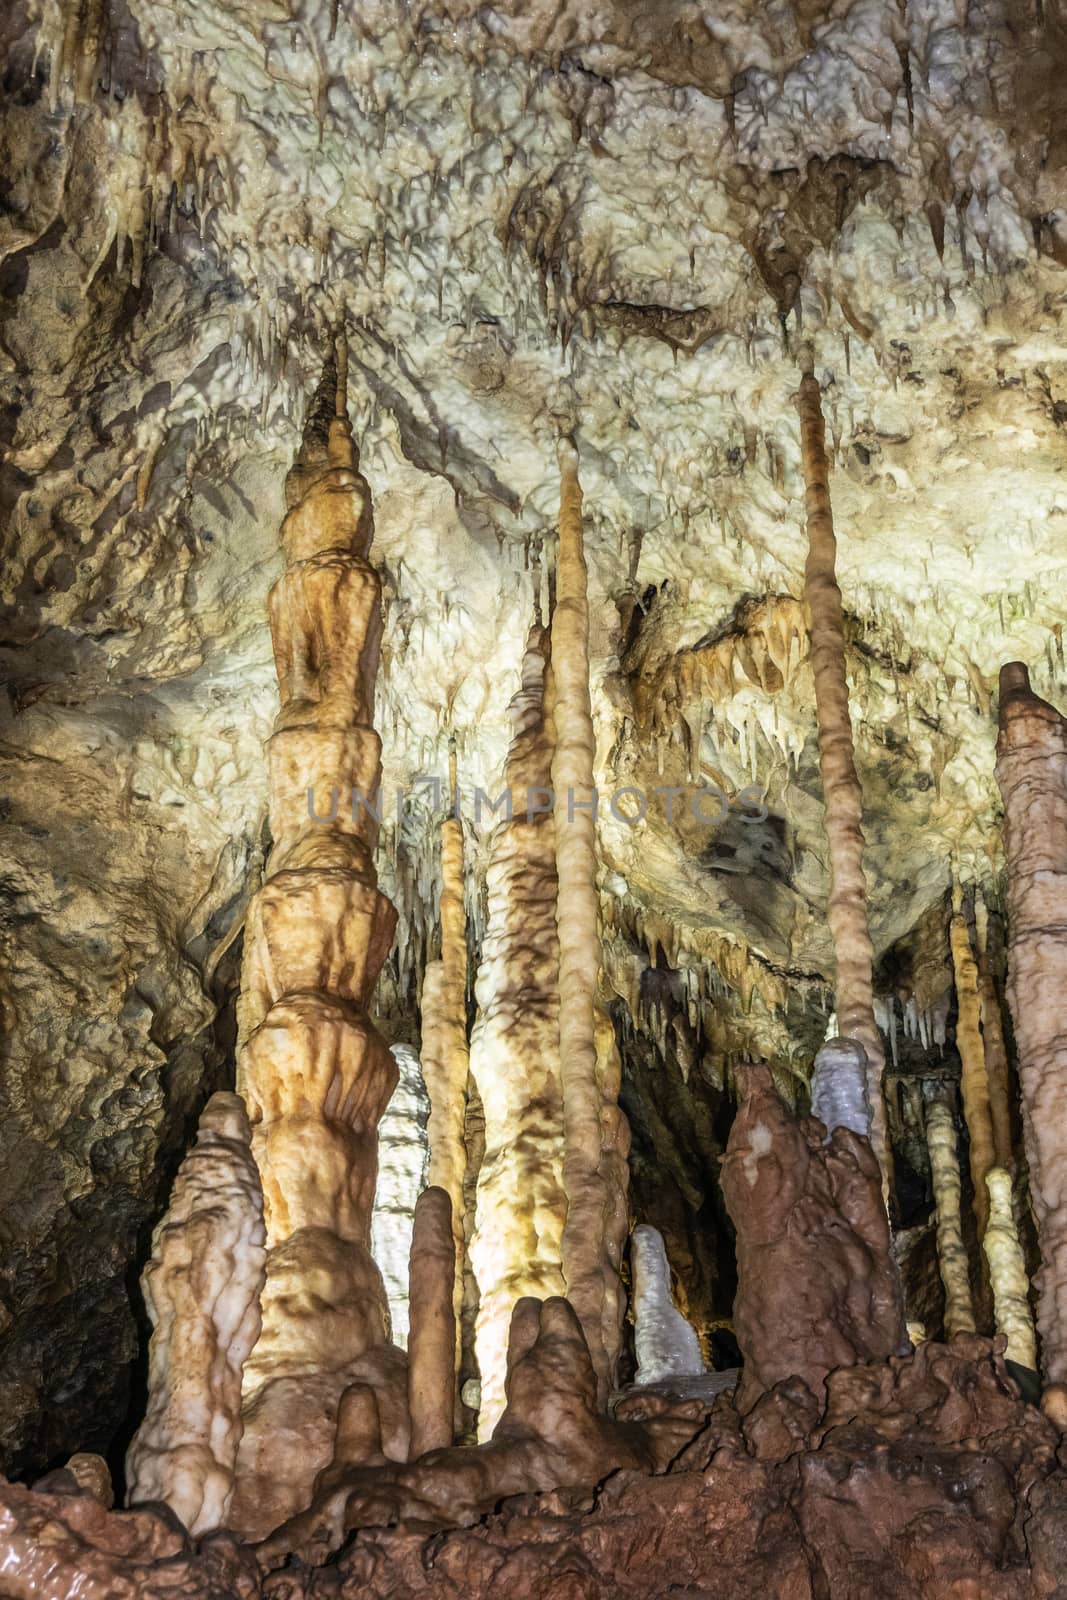 Han-sur-Lesse, Belgium - June 25, 2019: Grottes-de-Han 6 of 36. subterranean pictures of Stalagmites and stalactites in different shapes and colors throughout tunnels, caverns and large halls..